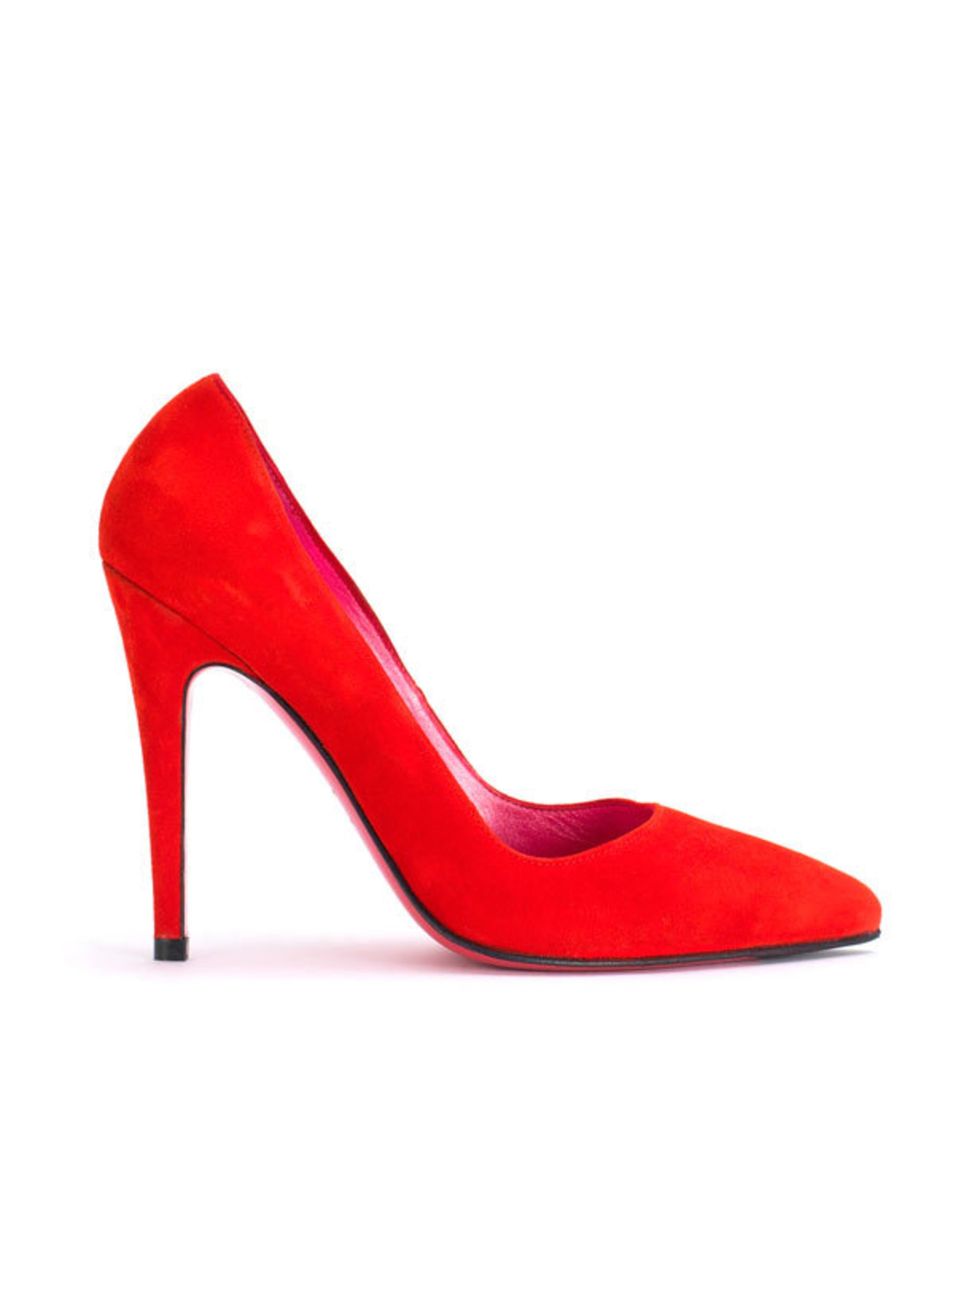 <p>Pointed pumps by Ursula Mascaro, £169, for stockists call 0207 493 8224</p>